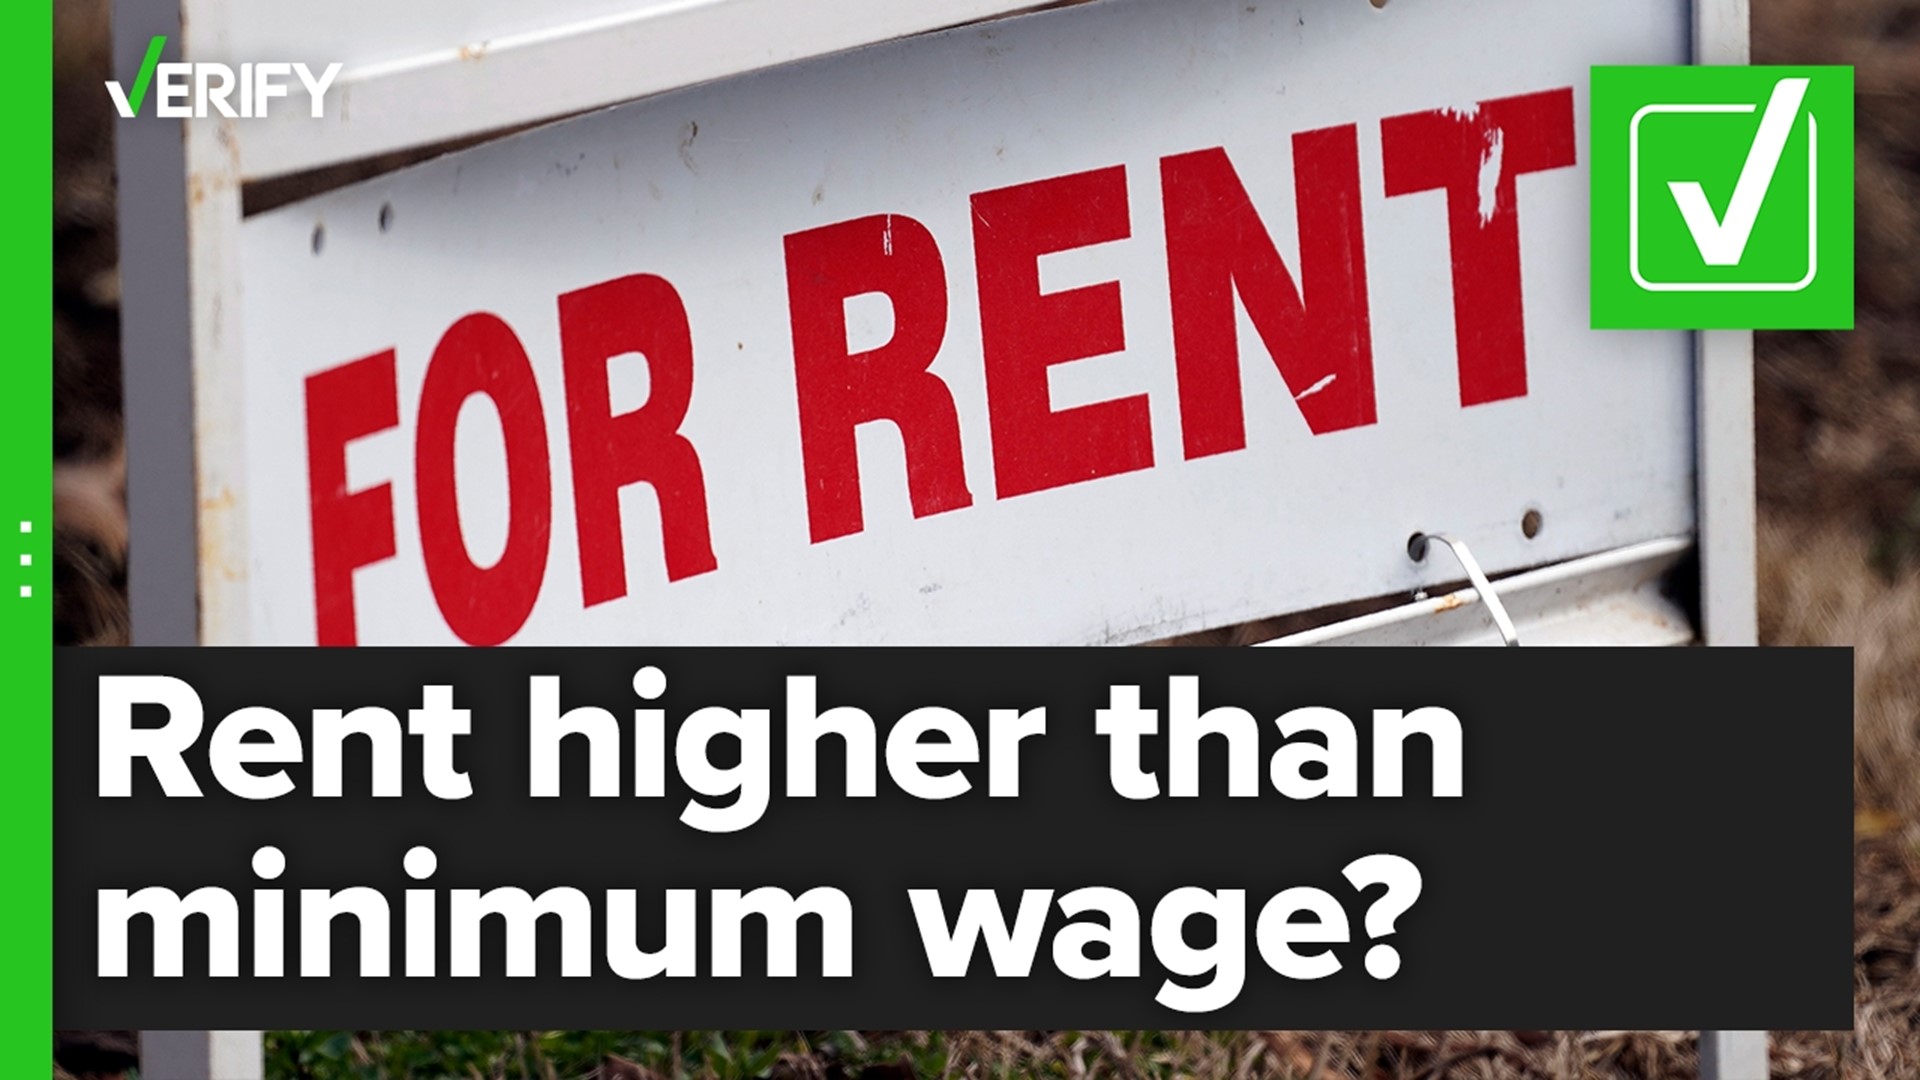 The amount of money earned on the federal minimum wage in a month is several hundred dollars less than the typical cost of rent nationwide.